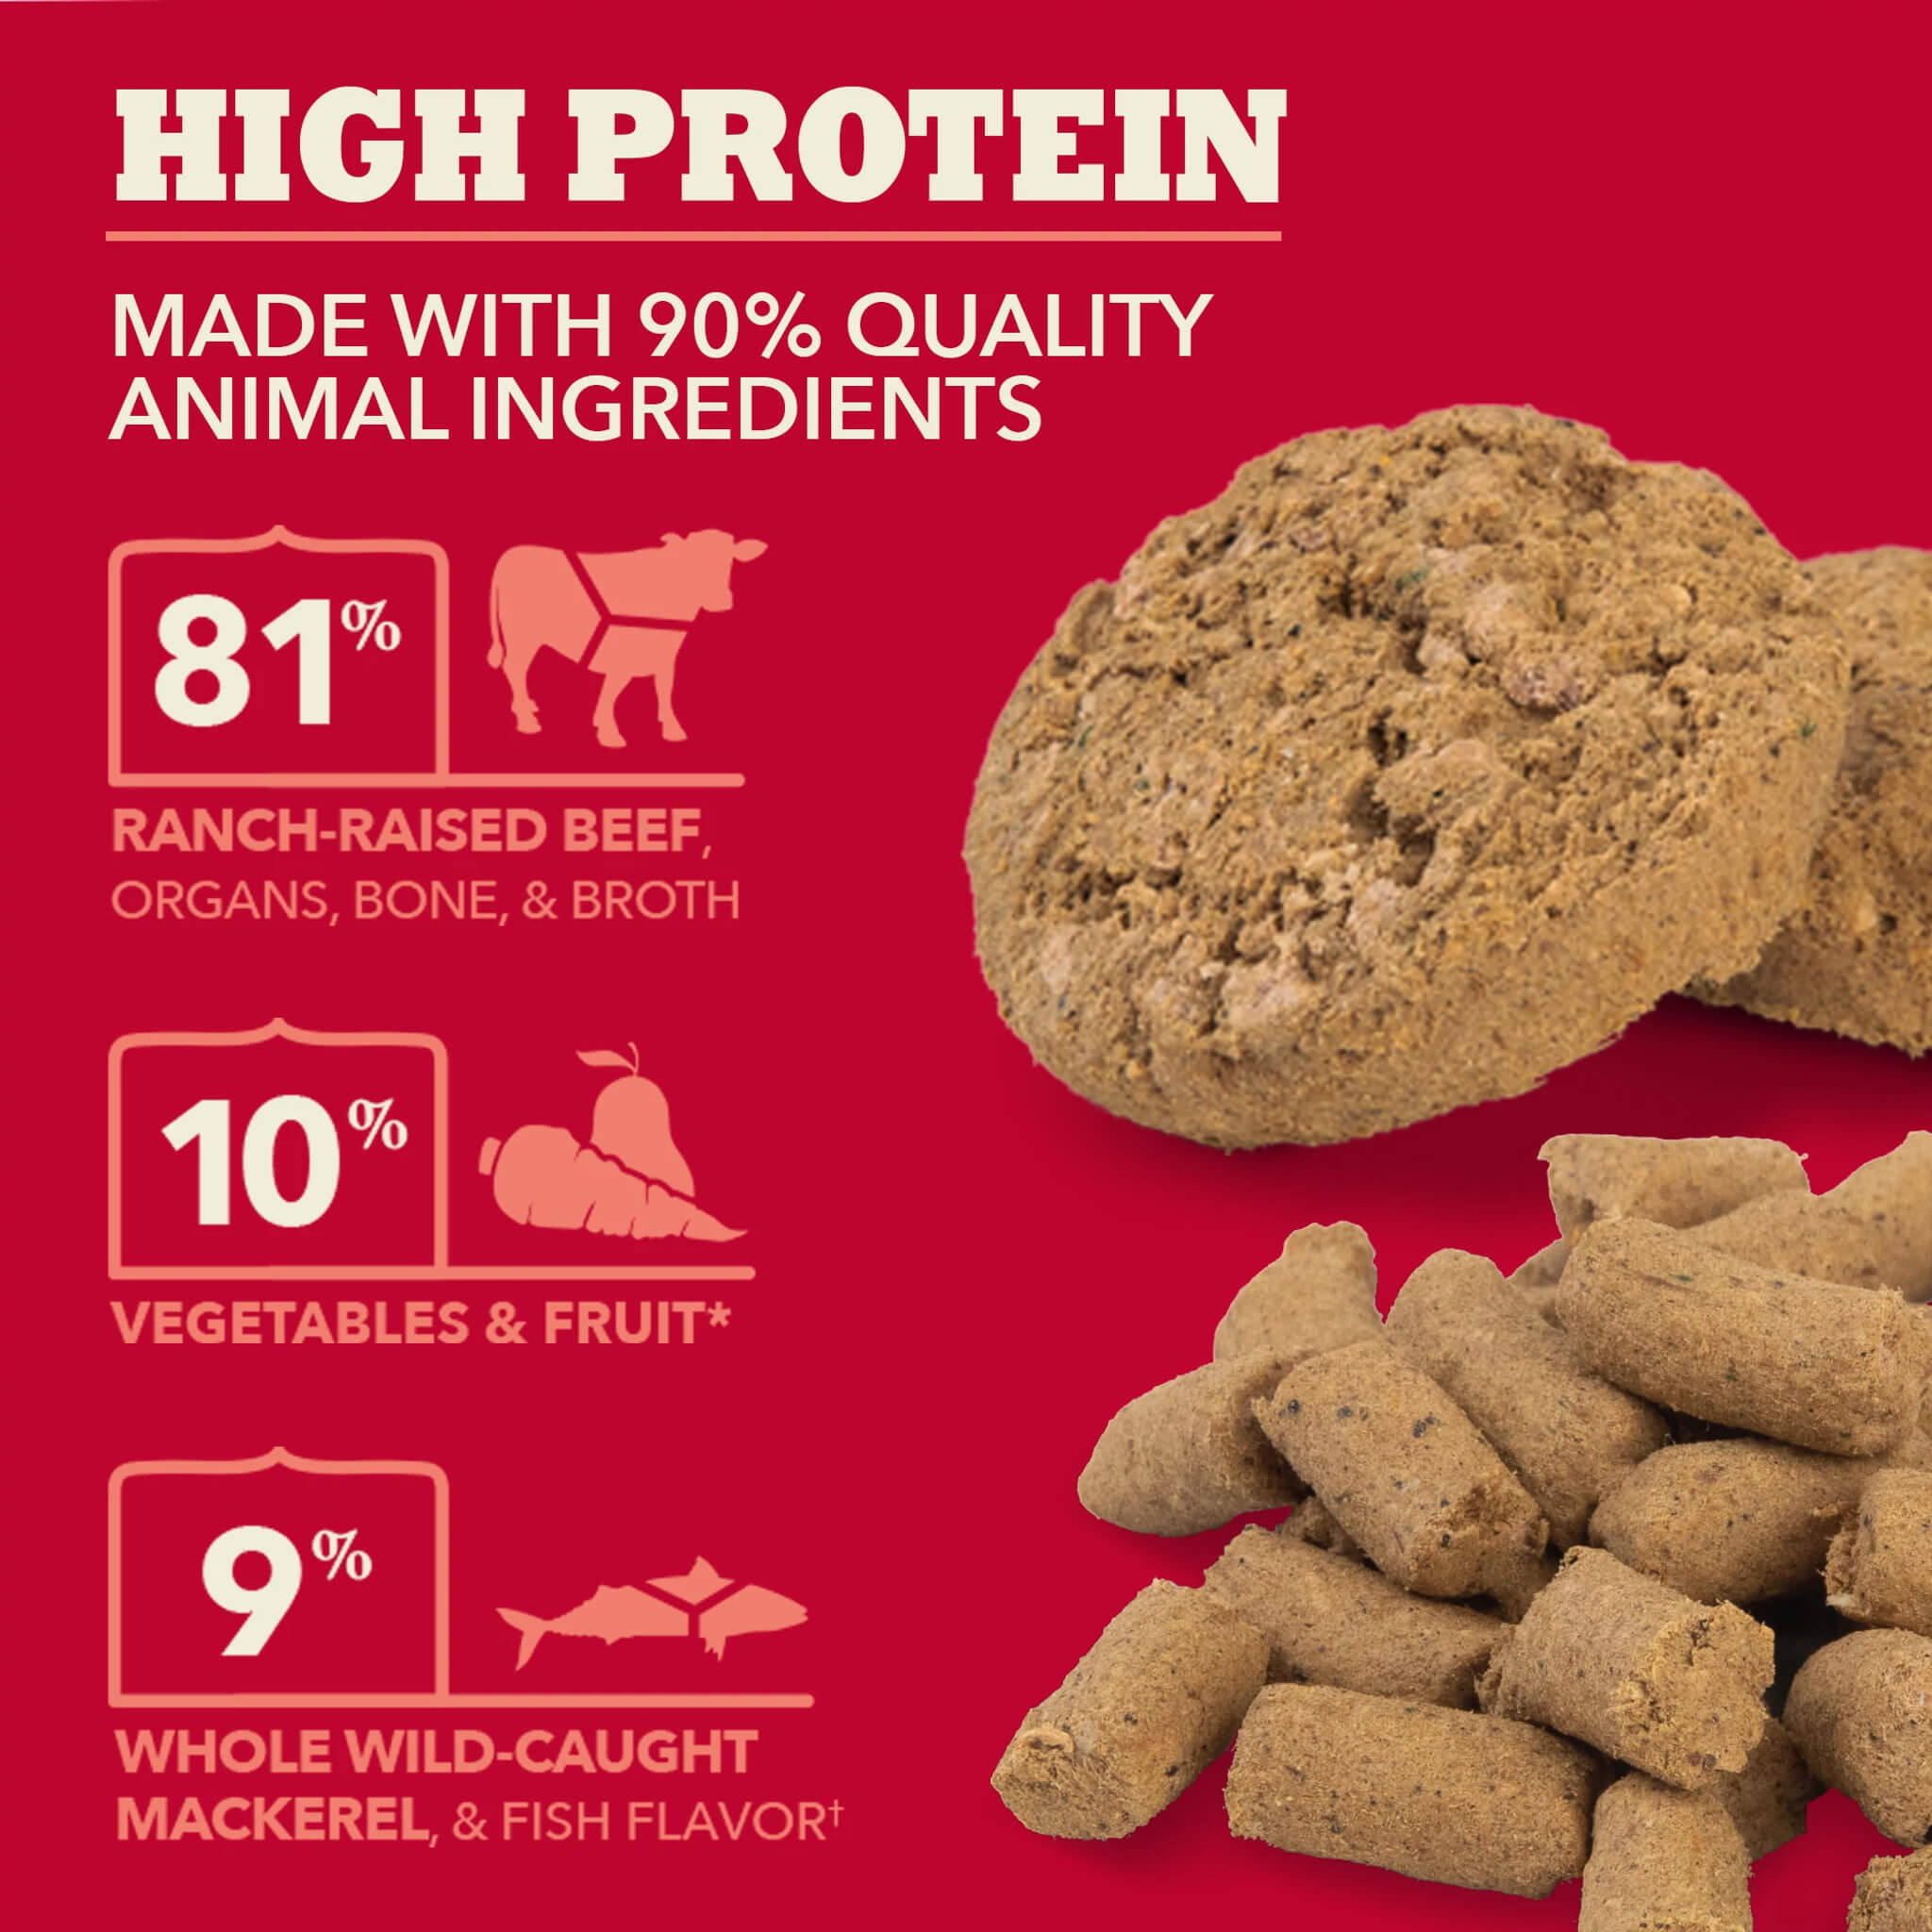 ACANA High protein - made with 90% quality animal ingredients